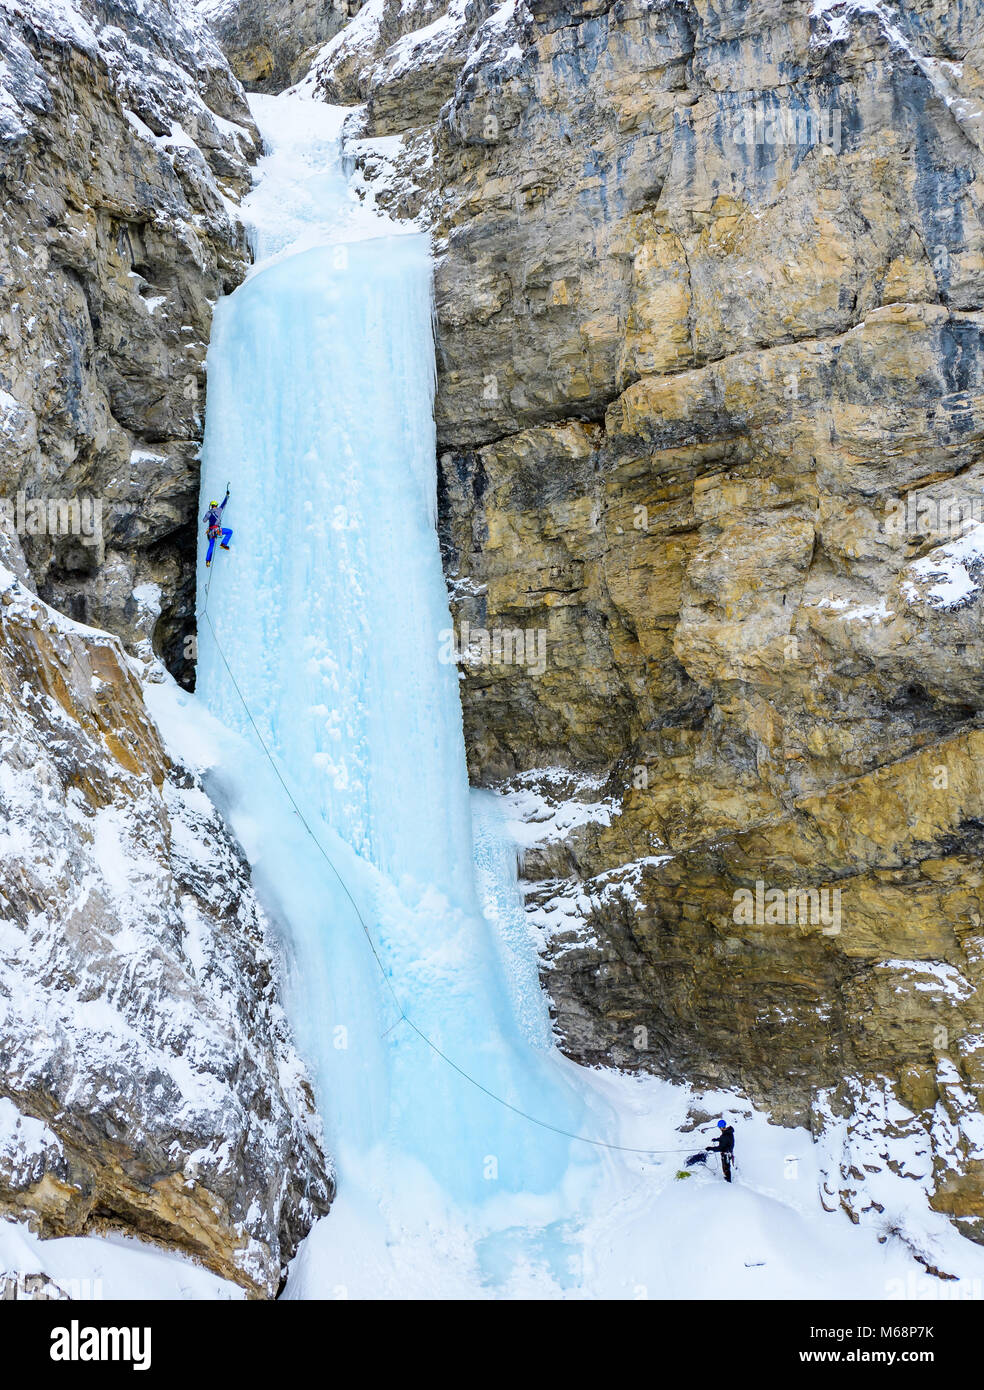 Andrew Stone and Shane Nelson climbing Professor Falls rated WI4 in Banff National Park Stock Photo